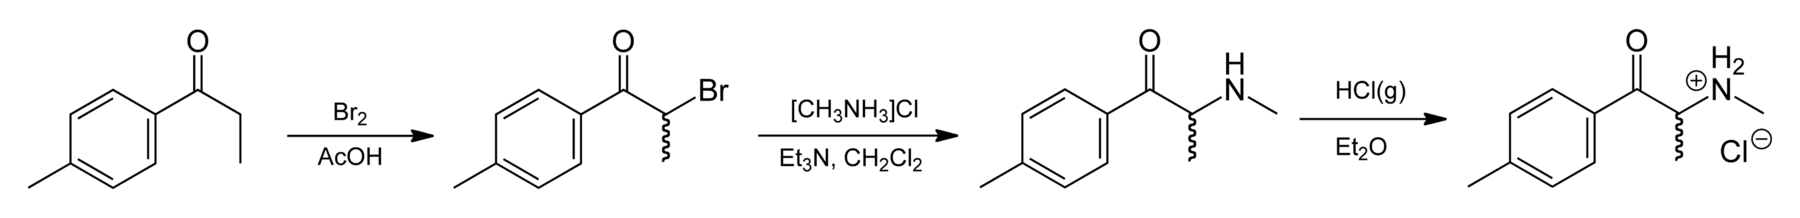 Mephedrone synthesis scheme from 4-methylpropiophenone